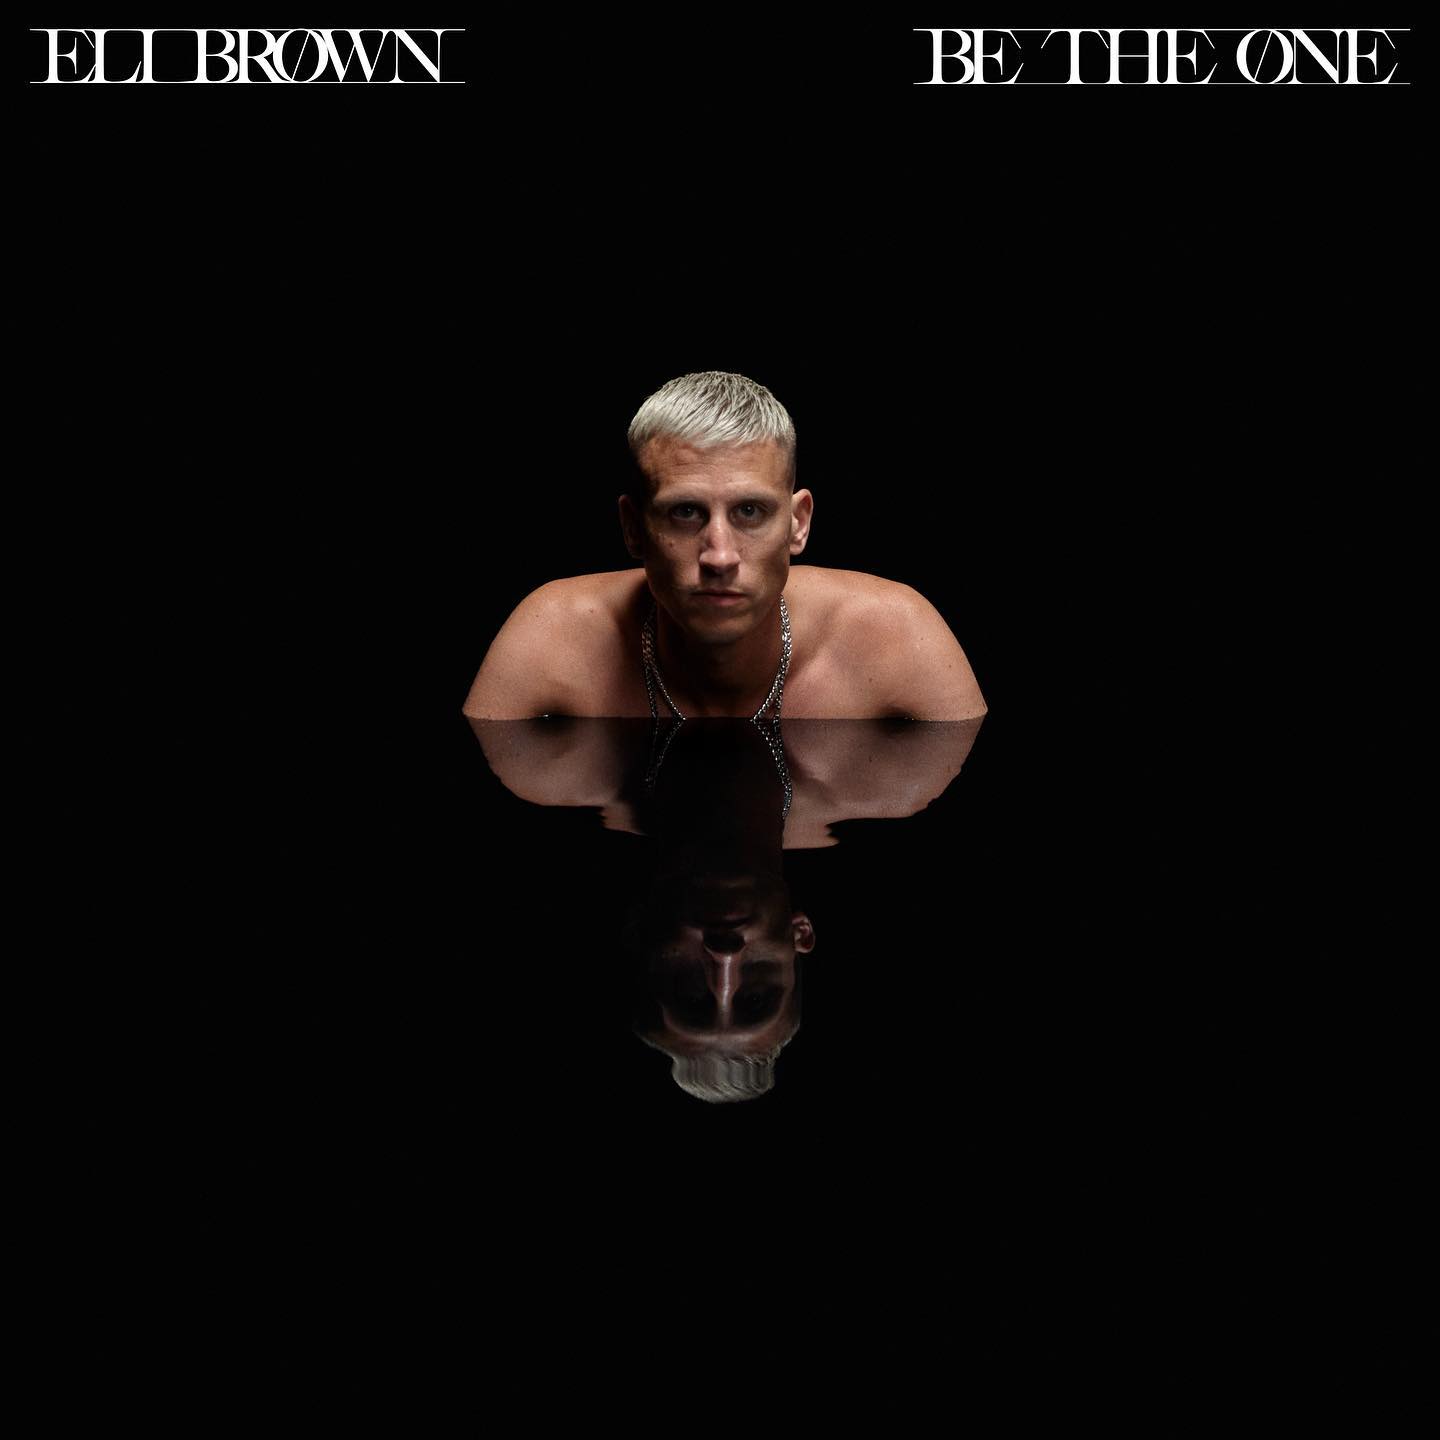 Eli Brown drops an electrifying new single 'Be The One' House Nest